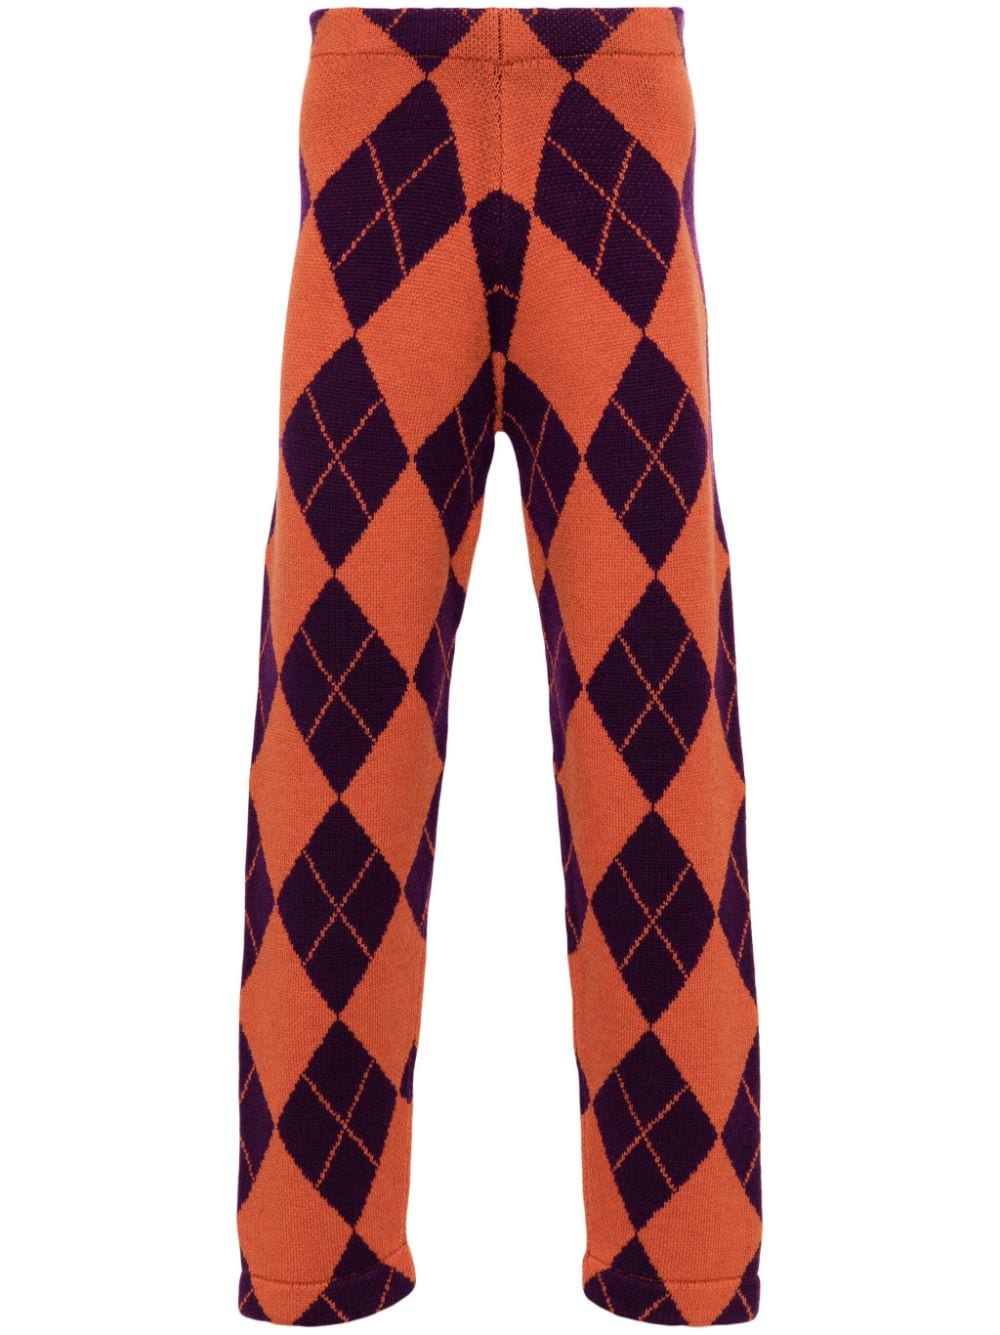 Liberal Youth Ministry Arlequin wool straight-leg trousers - Orange von Liberal Youth Ministry